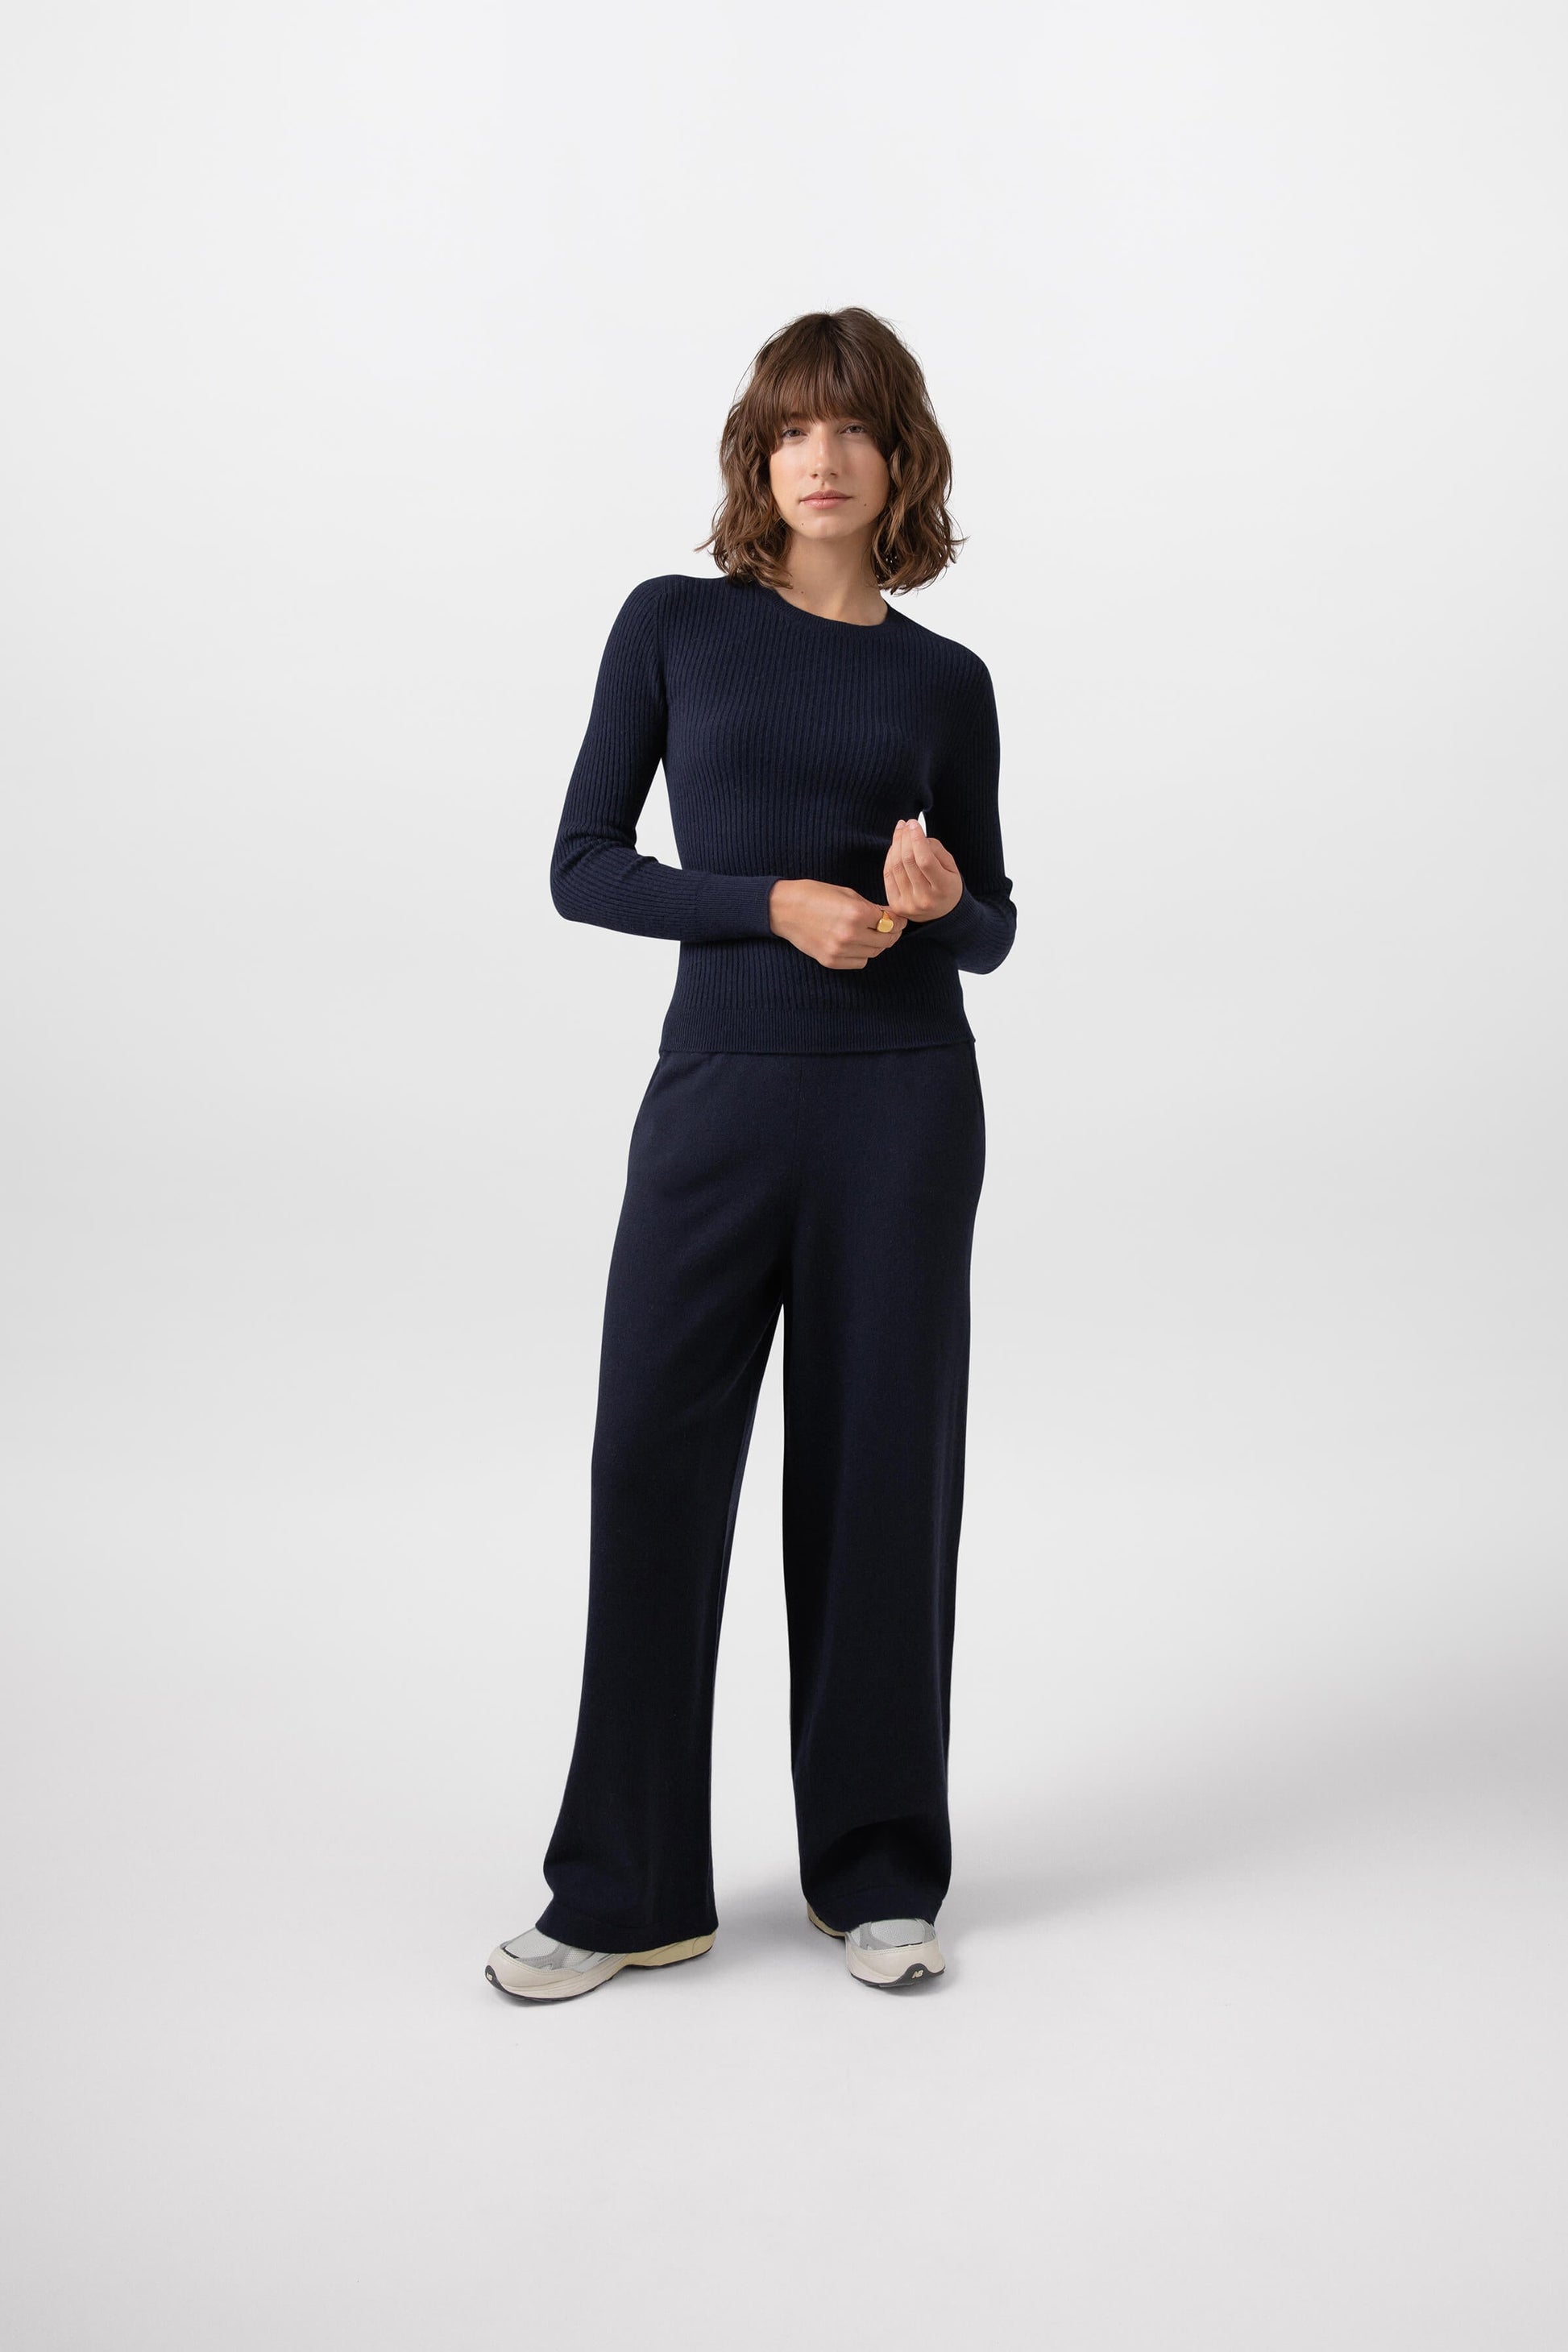 Johnstons of Elgin Knitted Cashmere Women's High Rise Wide Leg Trousers in Dark Navy worn with a matching Cashmere Sweater on a grey background KBP00926SD7286